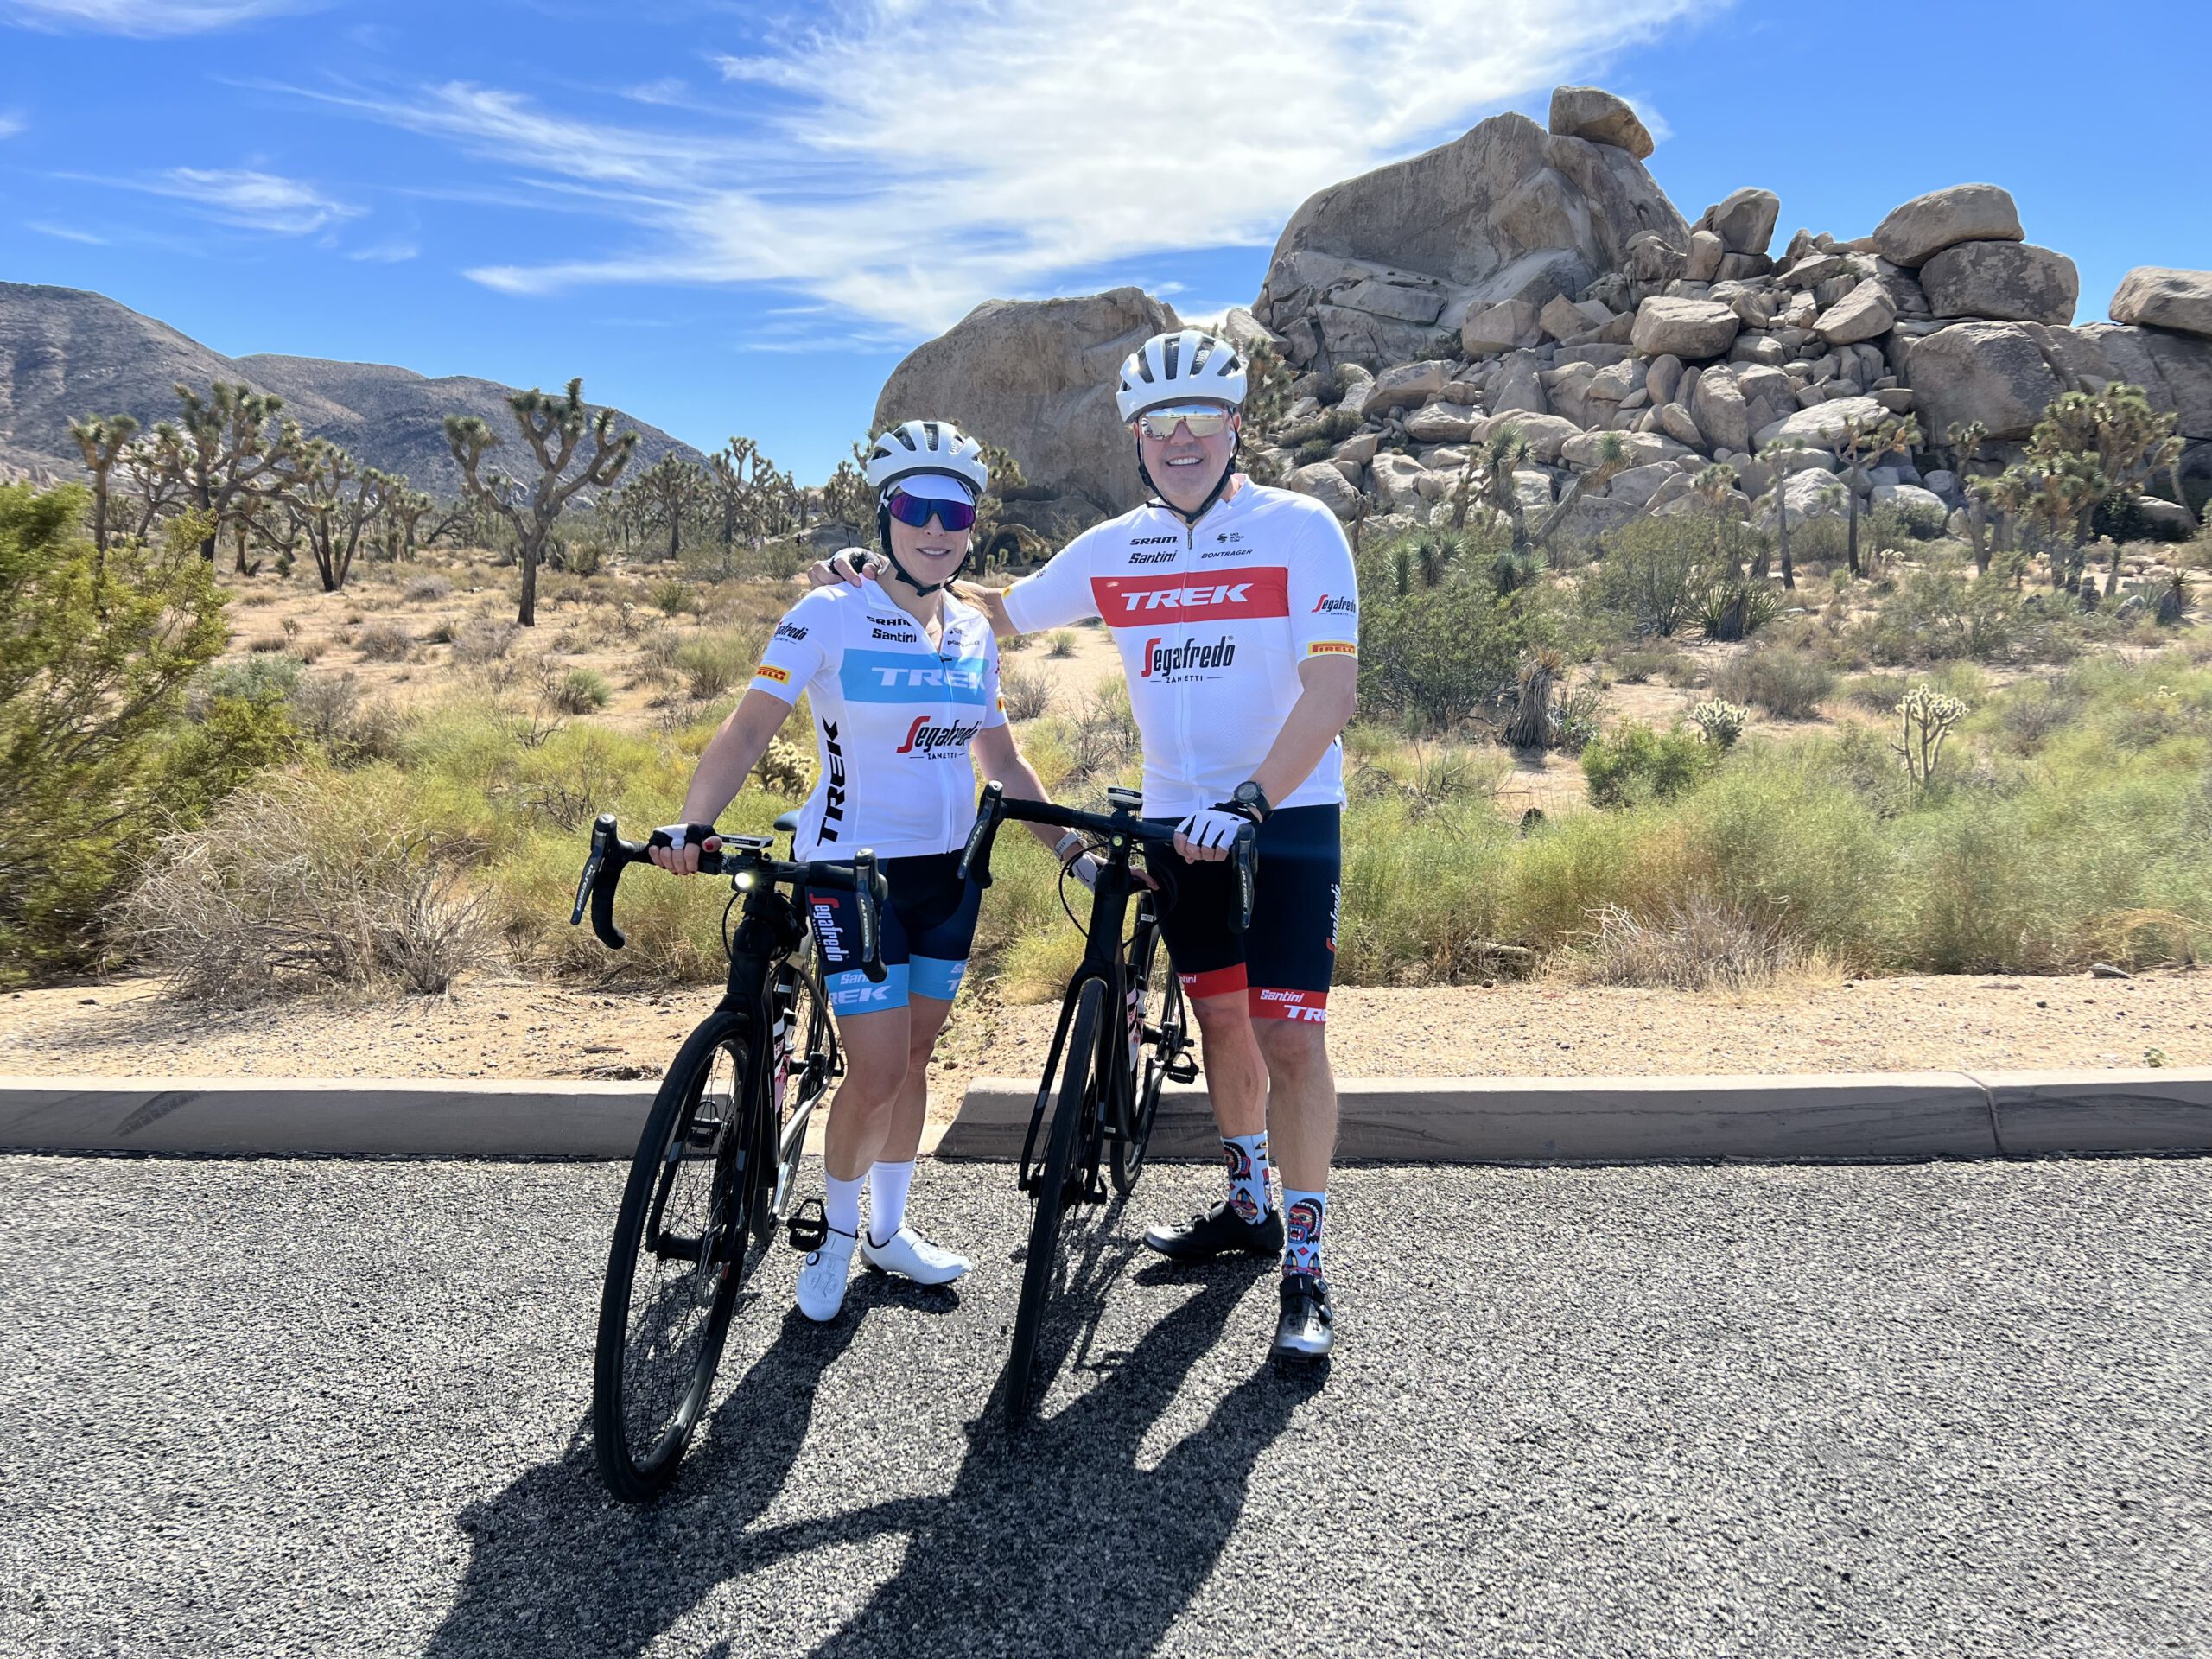 A couple pose with their bikes in front of cactus and rock formations